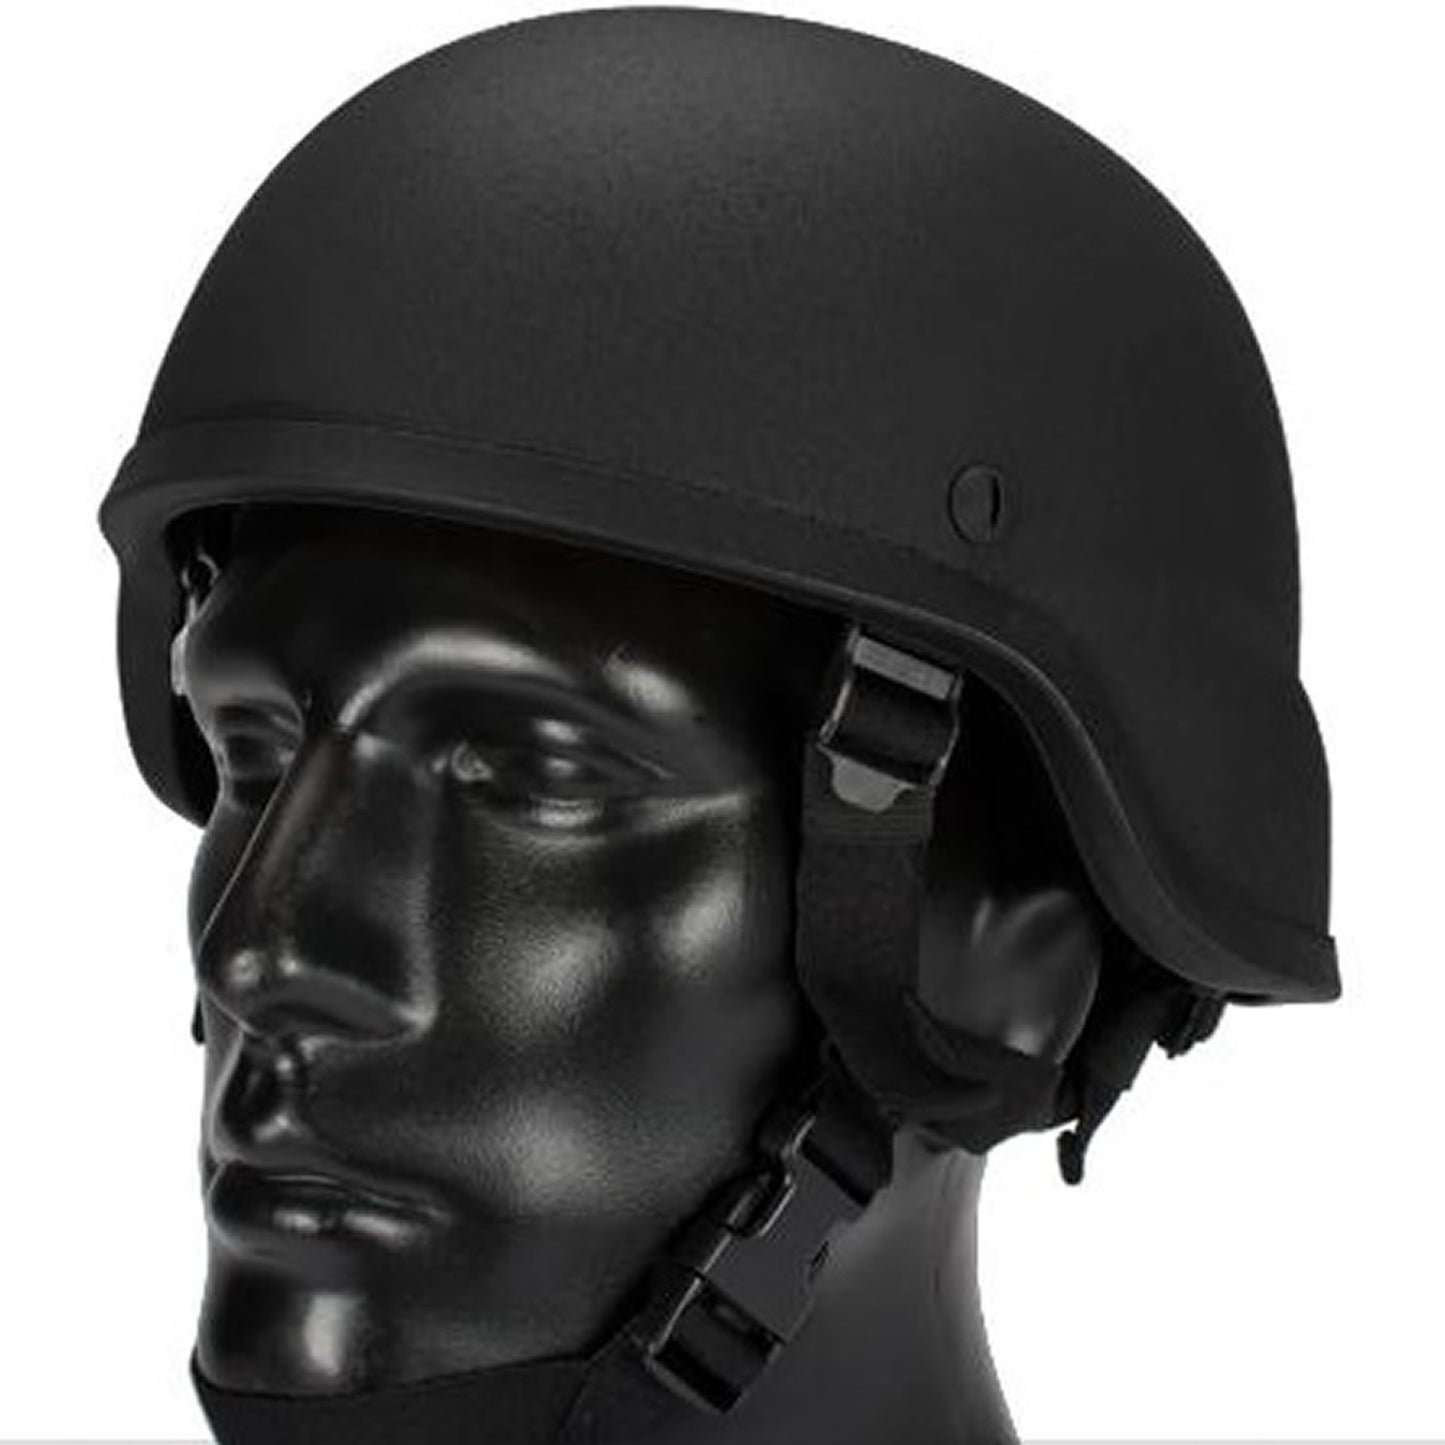 ABS injection Mich 2000 Helmet  One size fits most not all!  Please note: Not bulletproof so no hero stuff that's going to get you hurt!